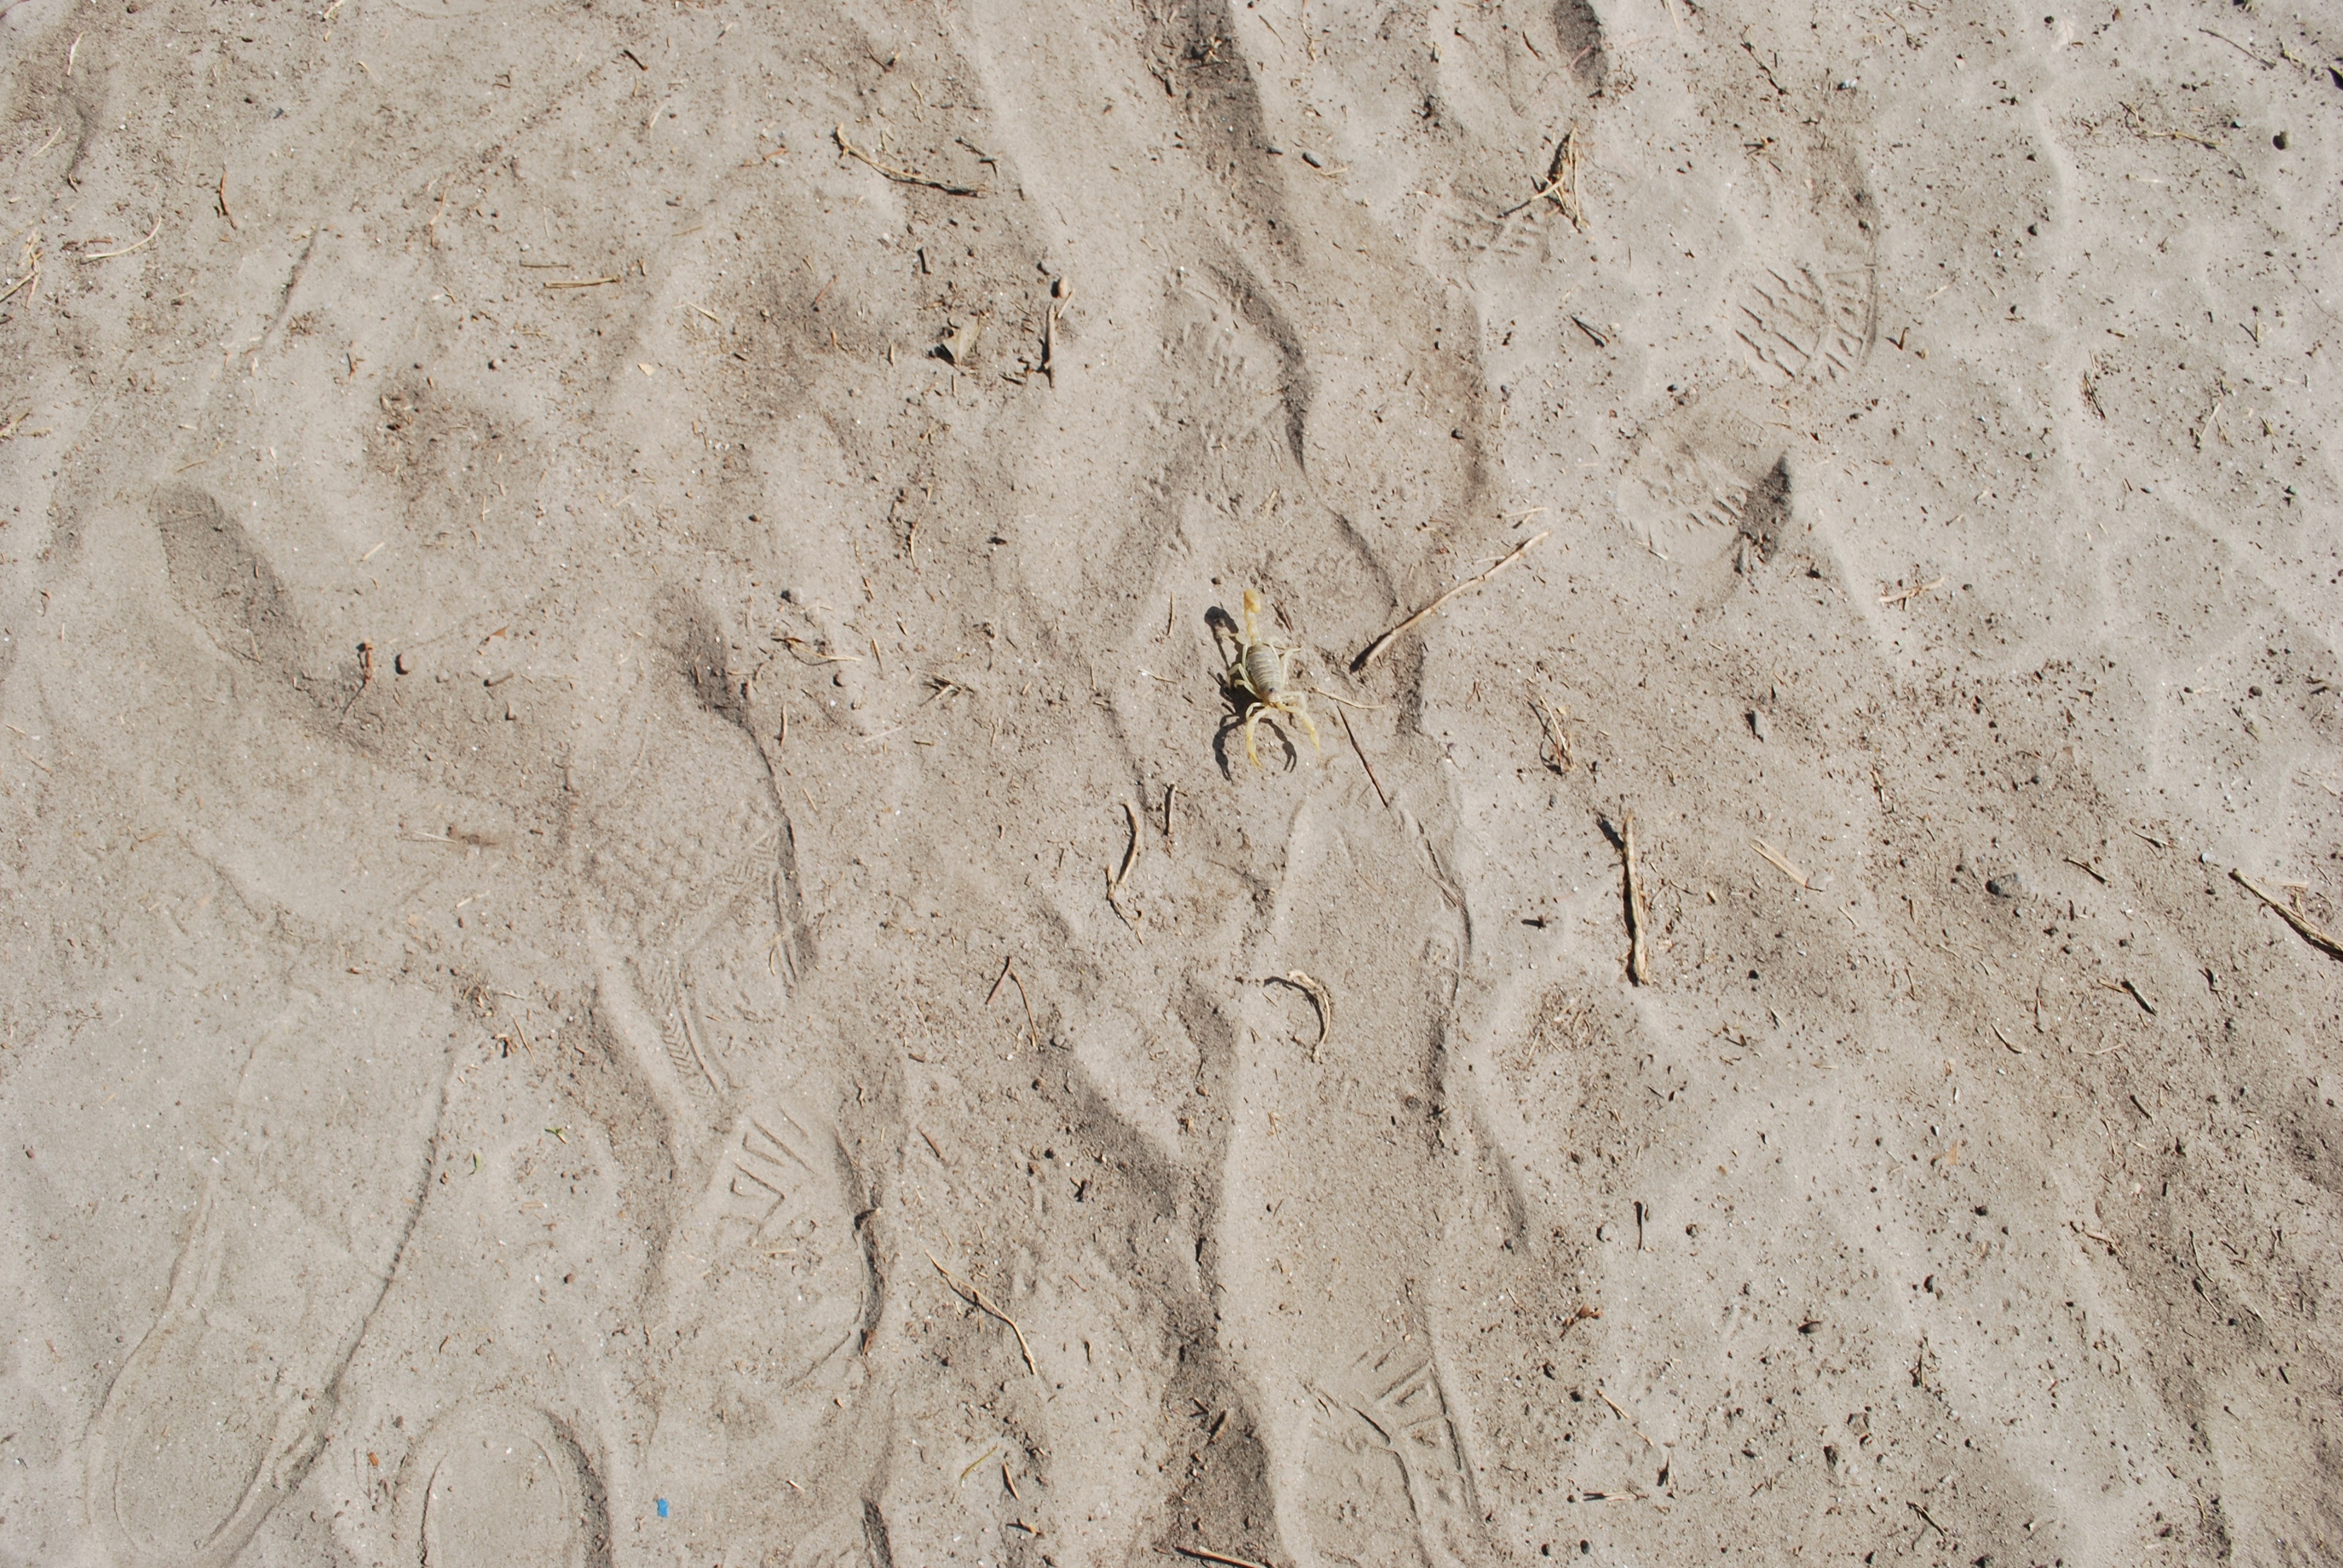 gray sand with foot prints